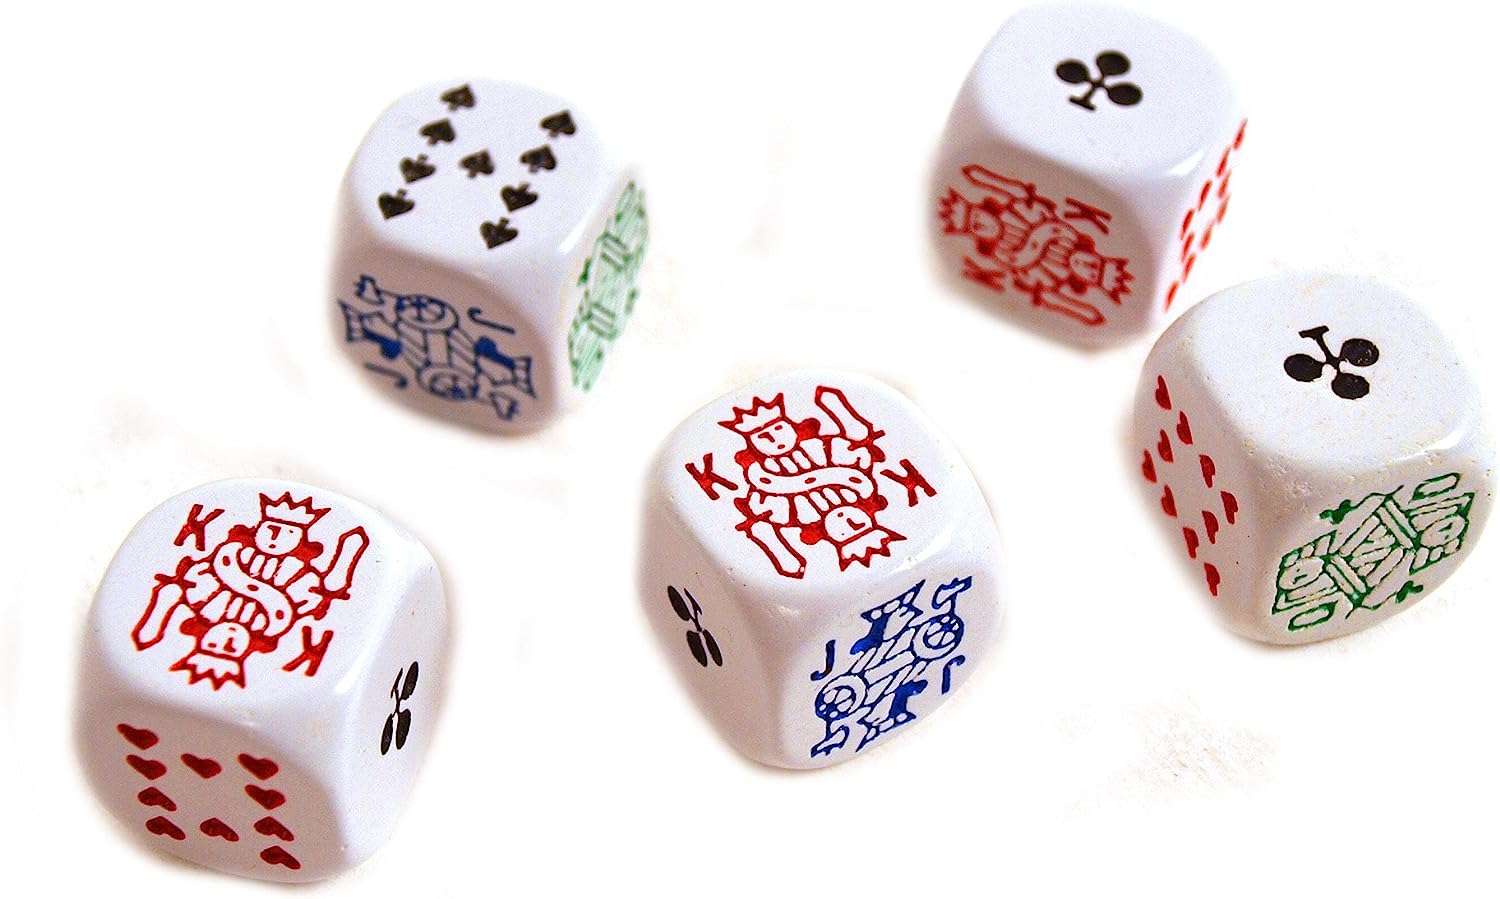 How To Use Poker Dice
